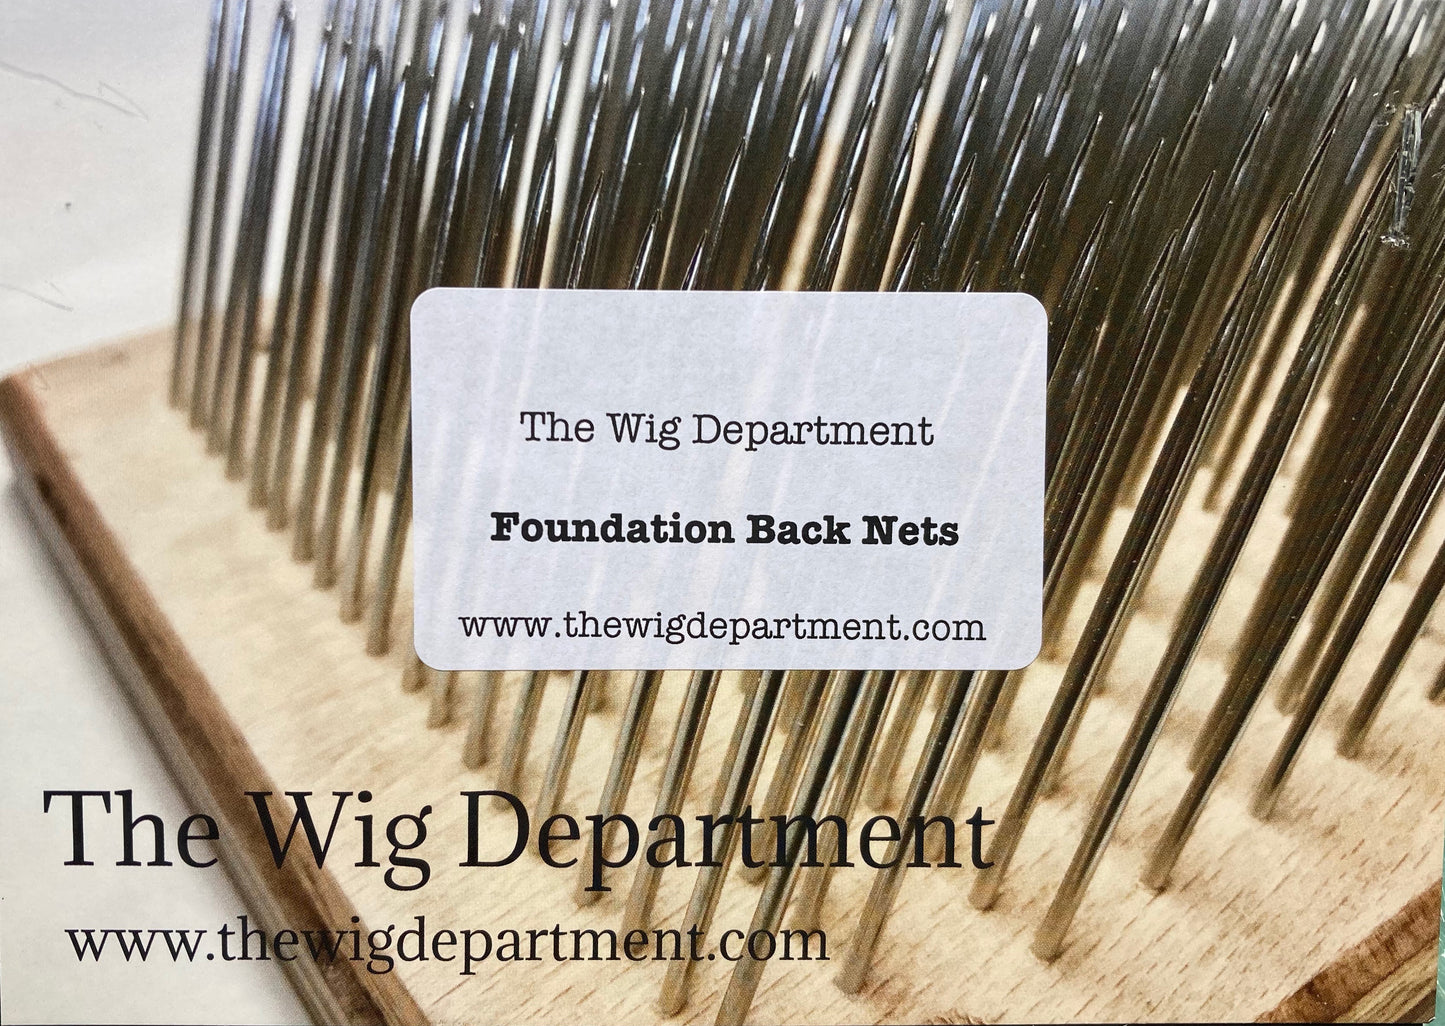 Wig Foundation net Samples - The Wig department